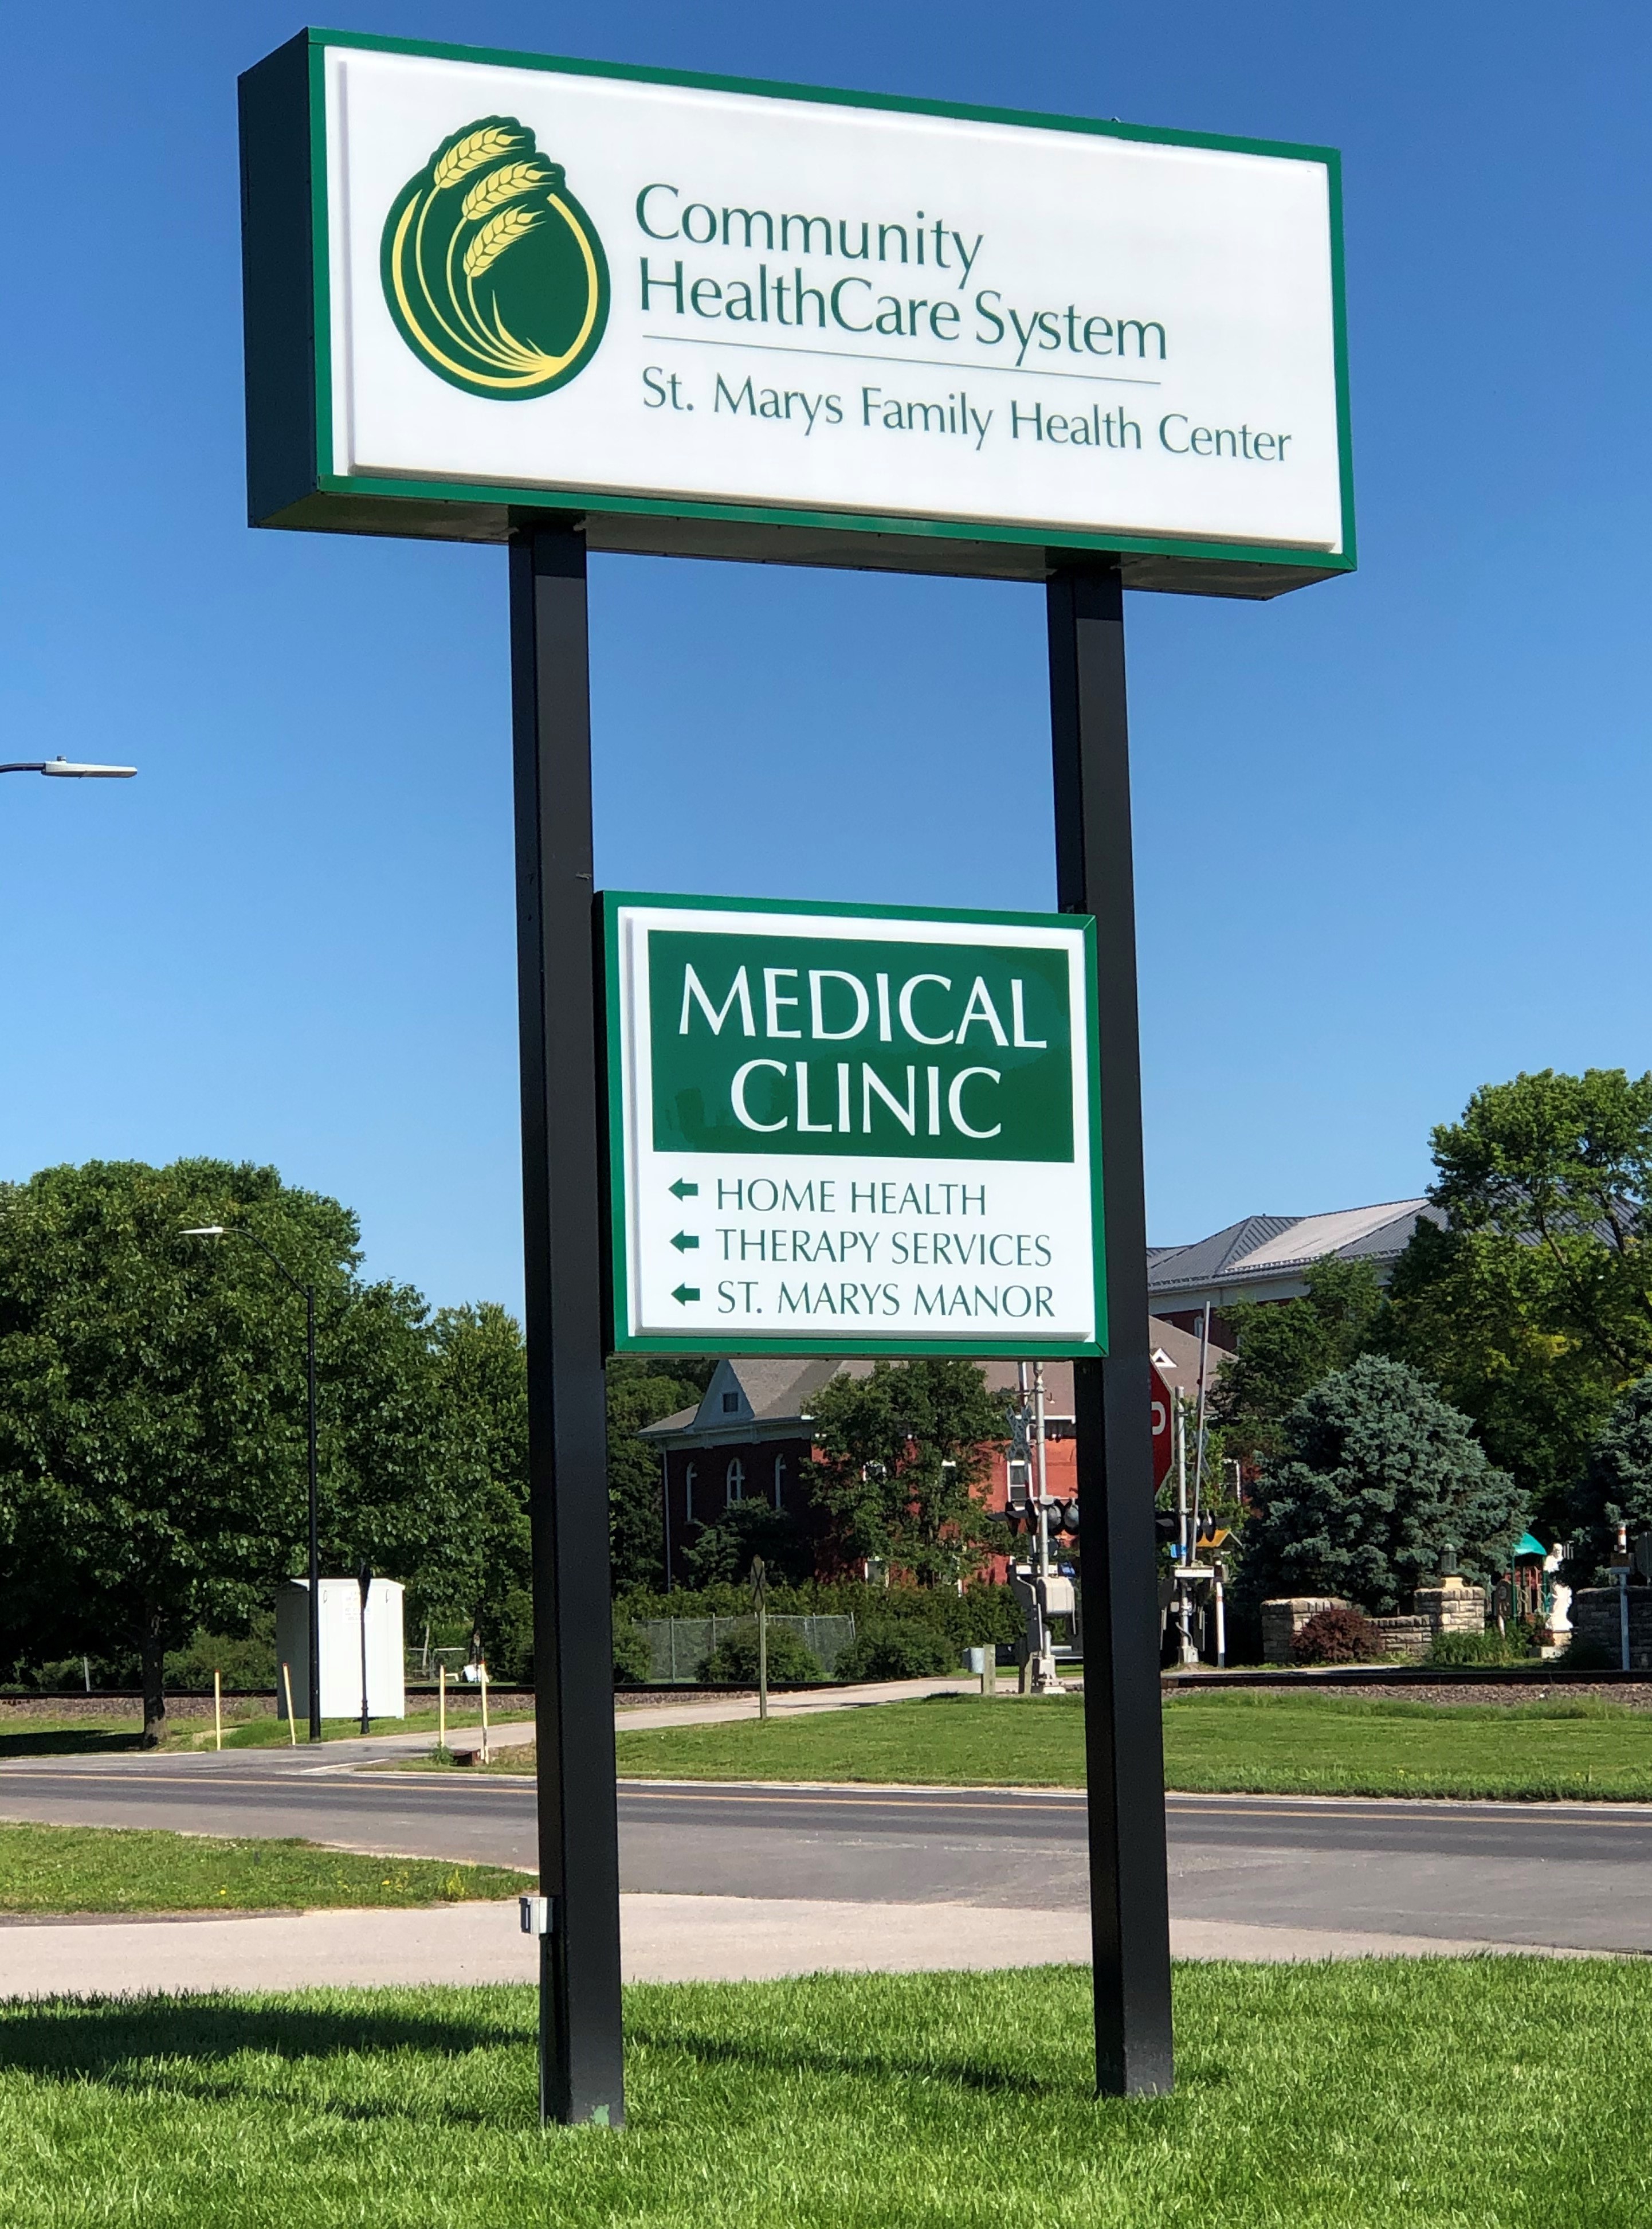 St. Marys Clinic offers extended hours